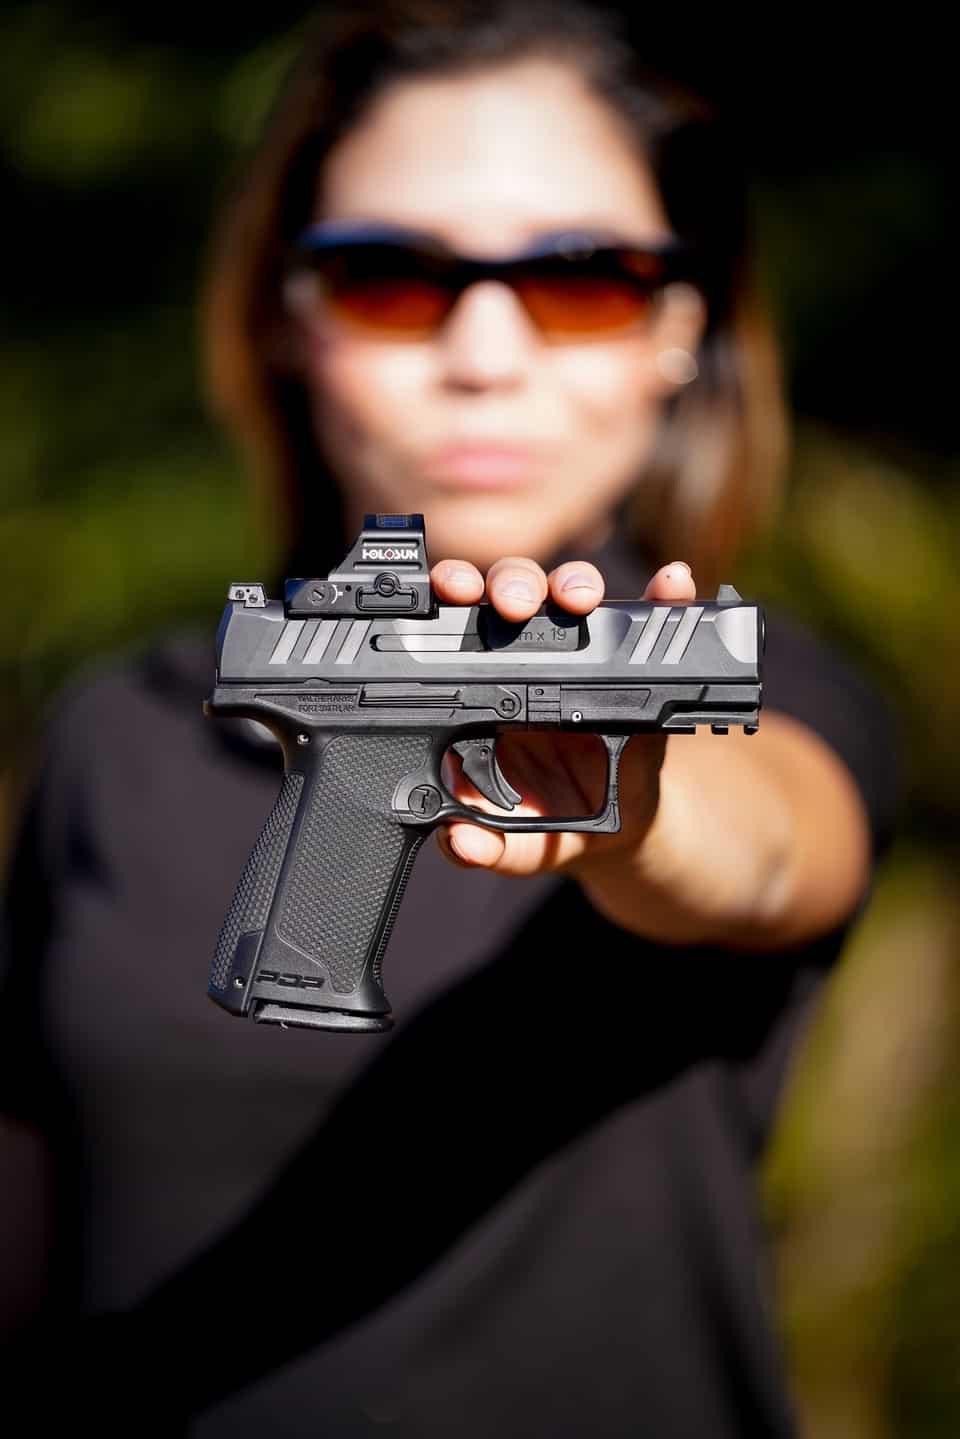 Gabby Franco PDP F2
What You Need to Know to Buy a Firearm